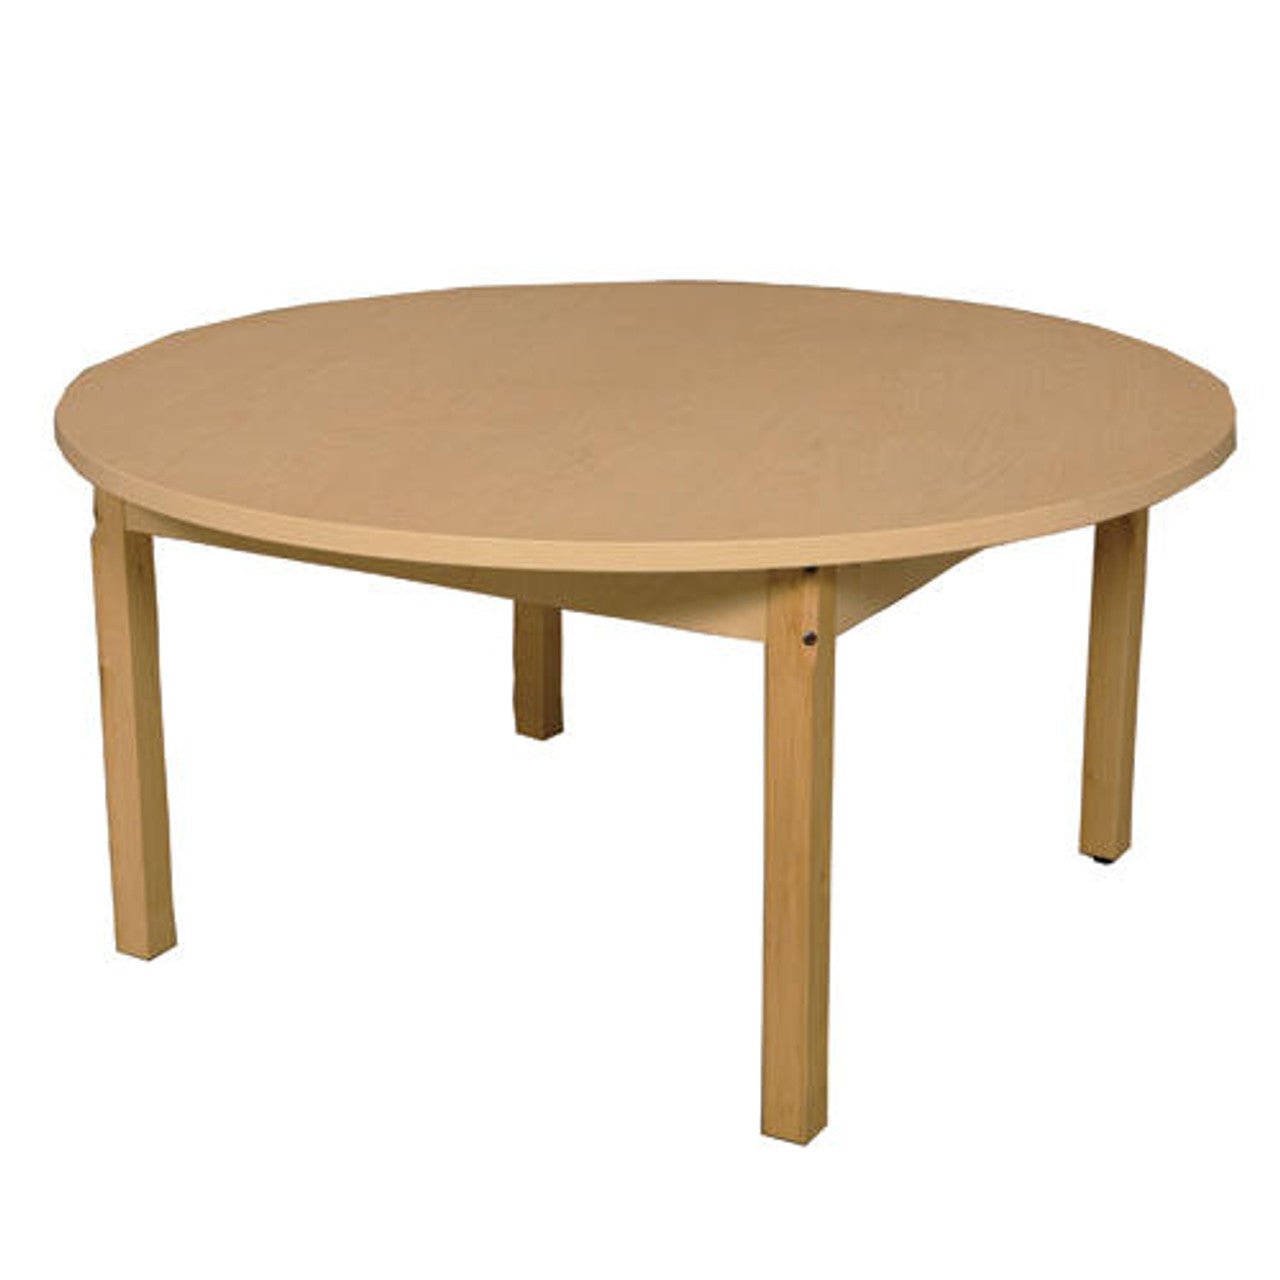 Round High Pressure Laminate Table with Hardwood Legs- 20"